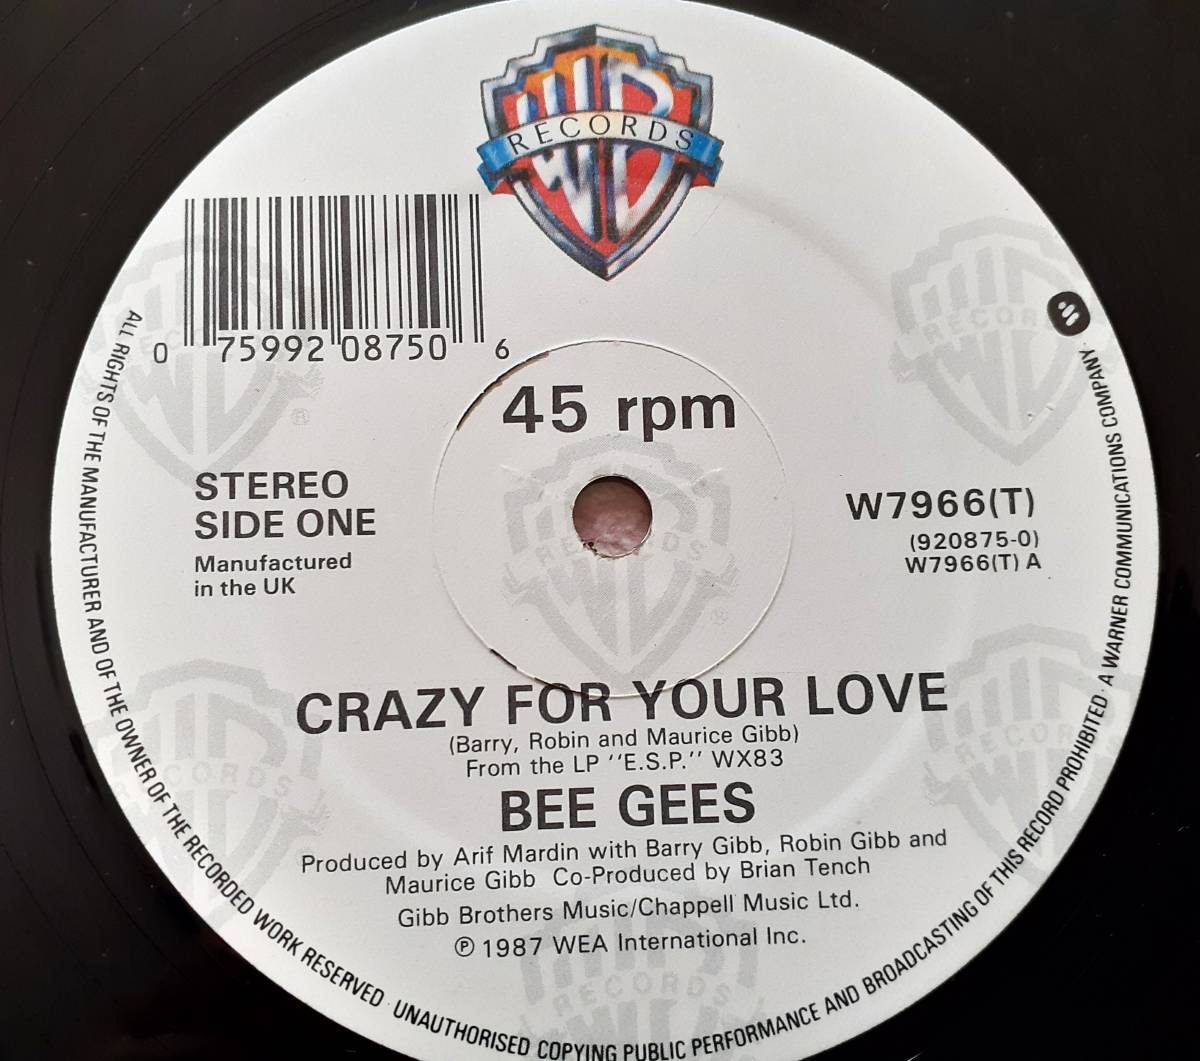 BEE GEES　ビー・ジーズ　Crazy For Your Love / You Win Again (5.14 Remix)　 UK盤 12” シングル レコード _画像4